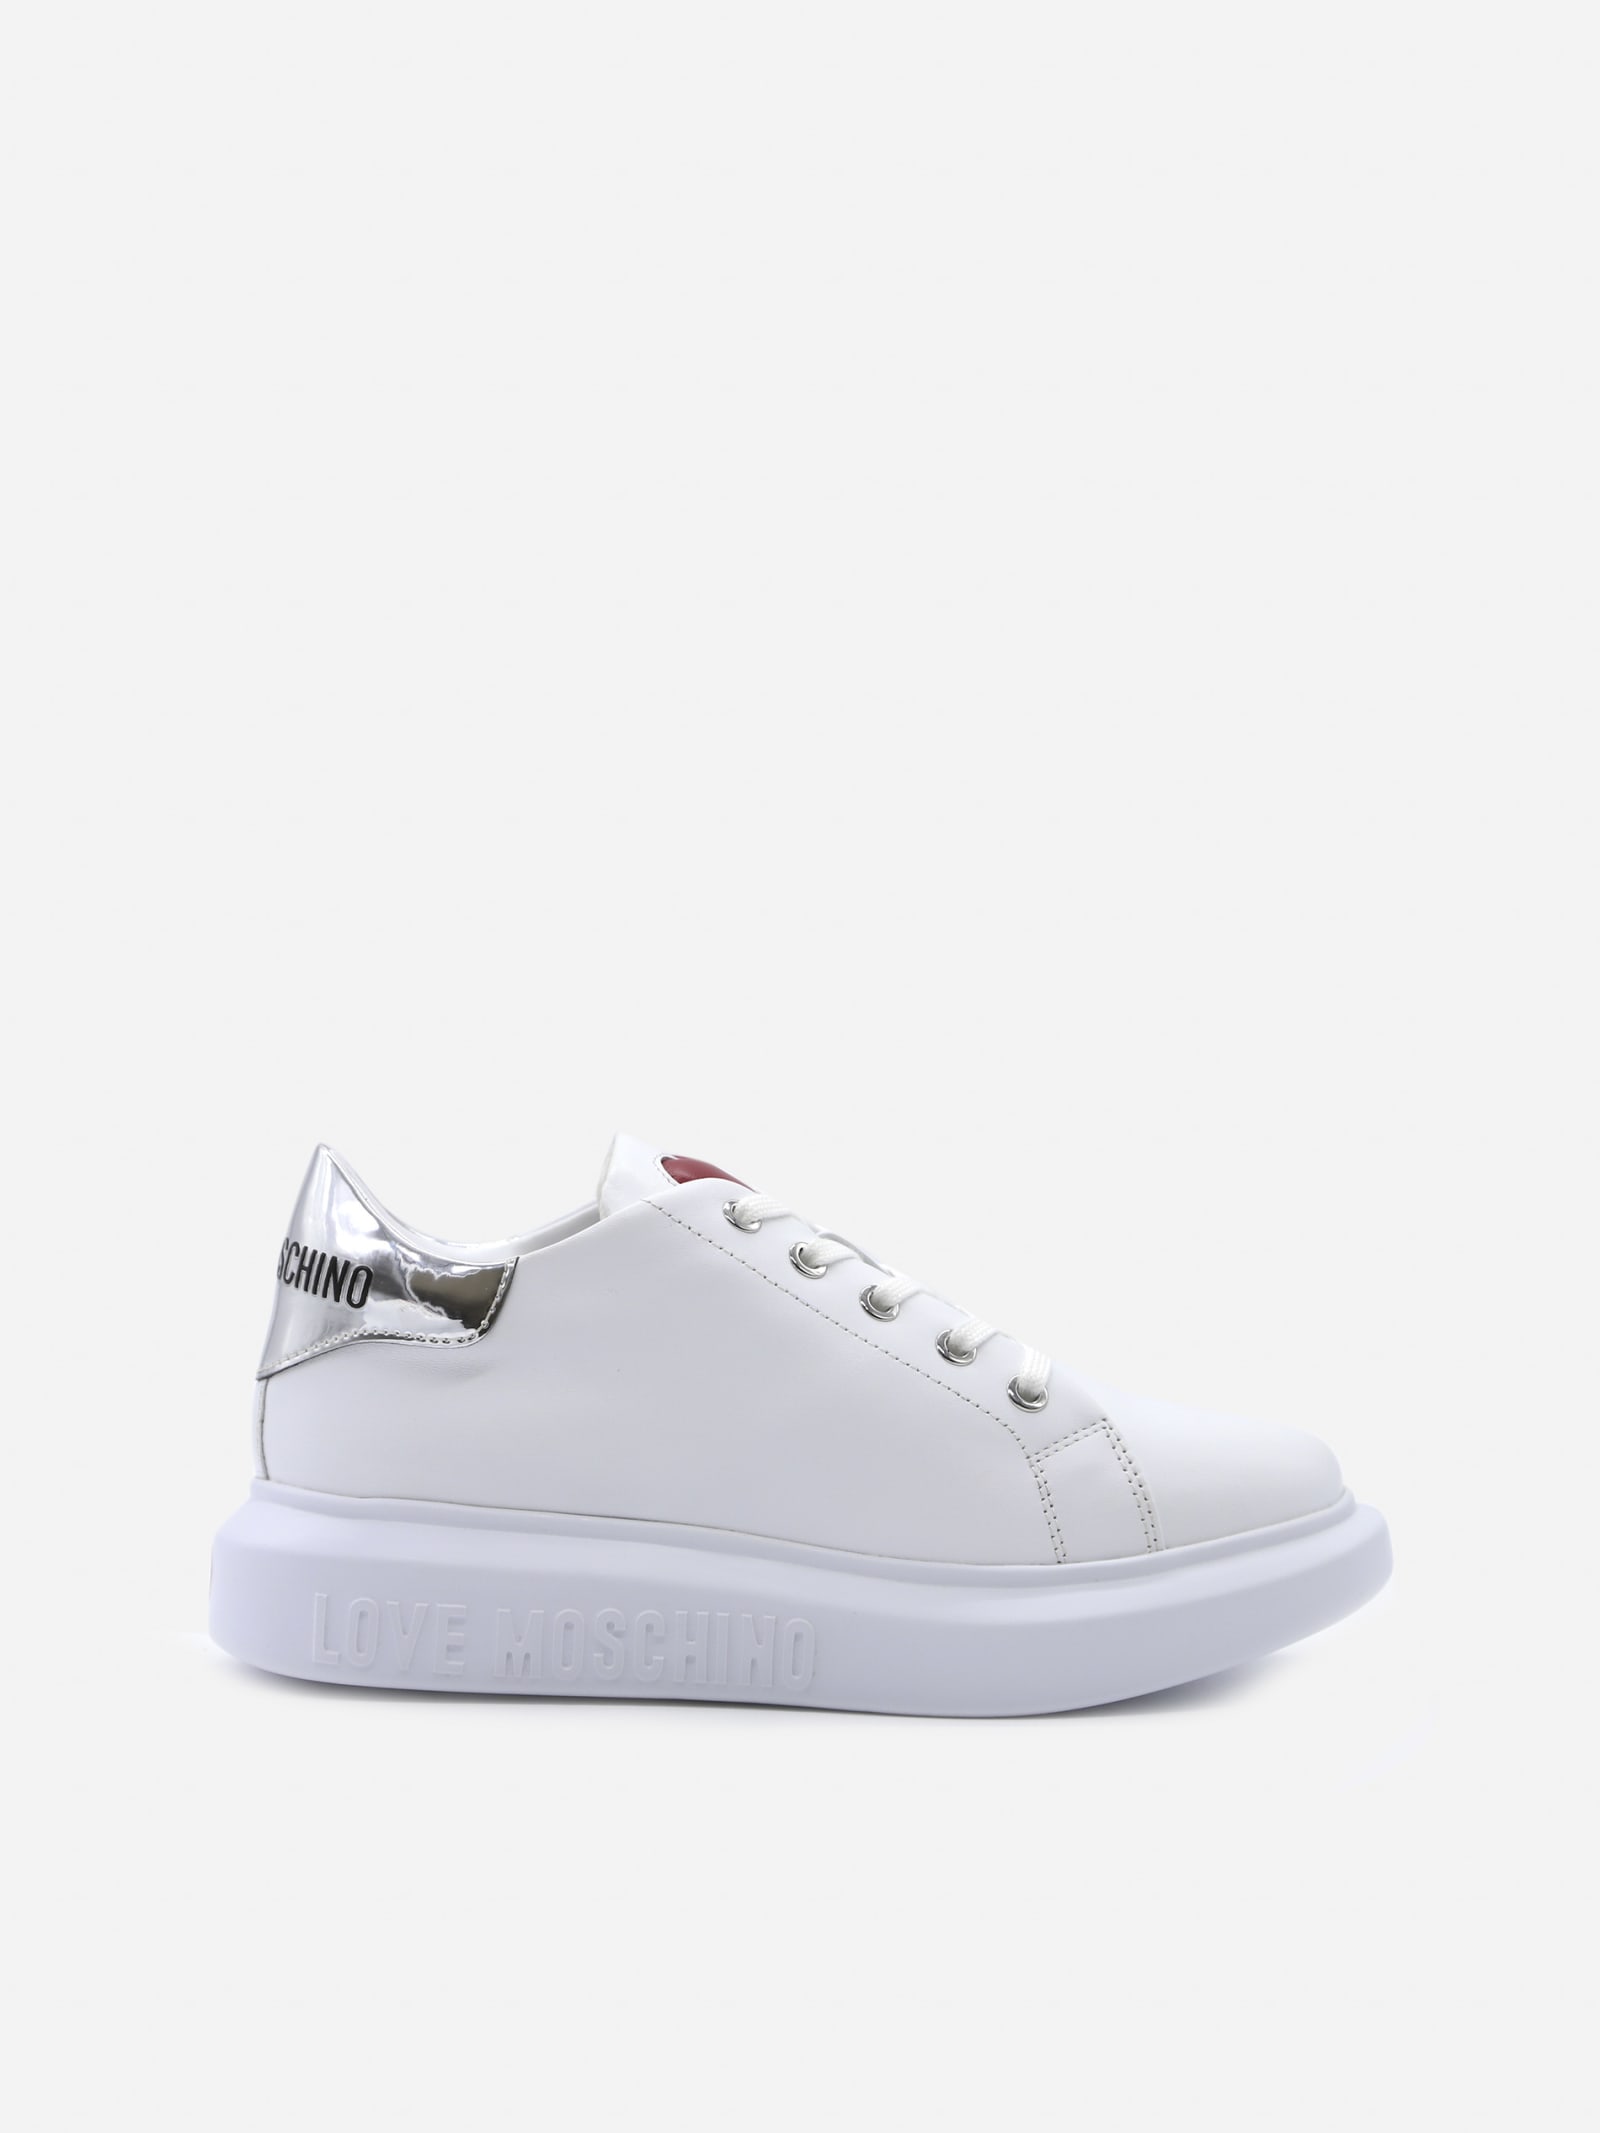 Buy Love Moschino Leather Sneakers With Contrasting Heel Tab online, shop Love Moschino shoes with free shipping